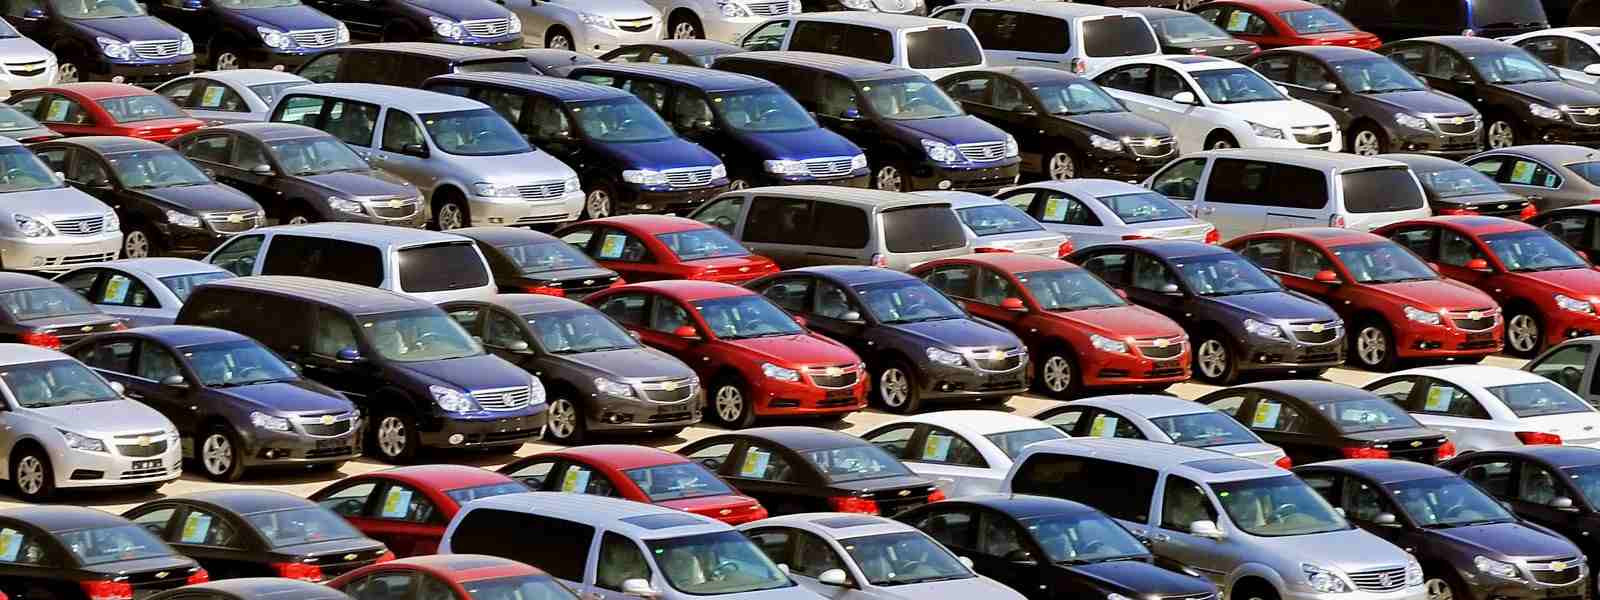 Why The Used Cars Are Going To Be Banned